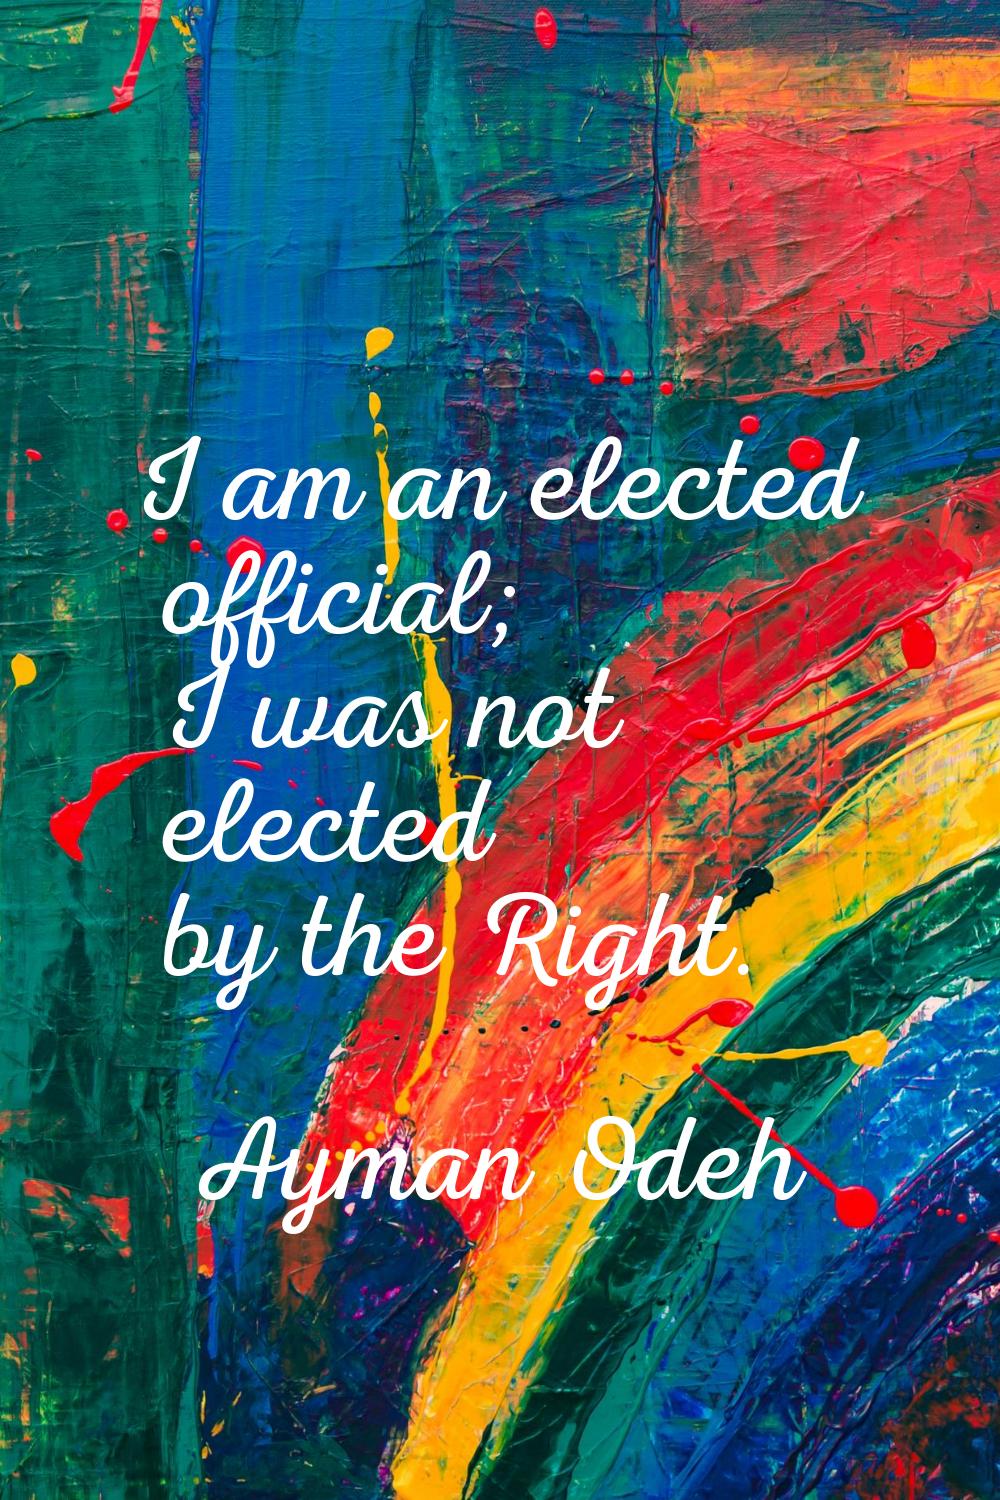 I am an elected official; I was not elected by the Right.